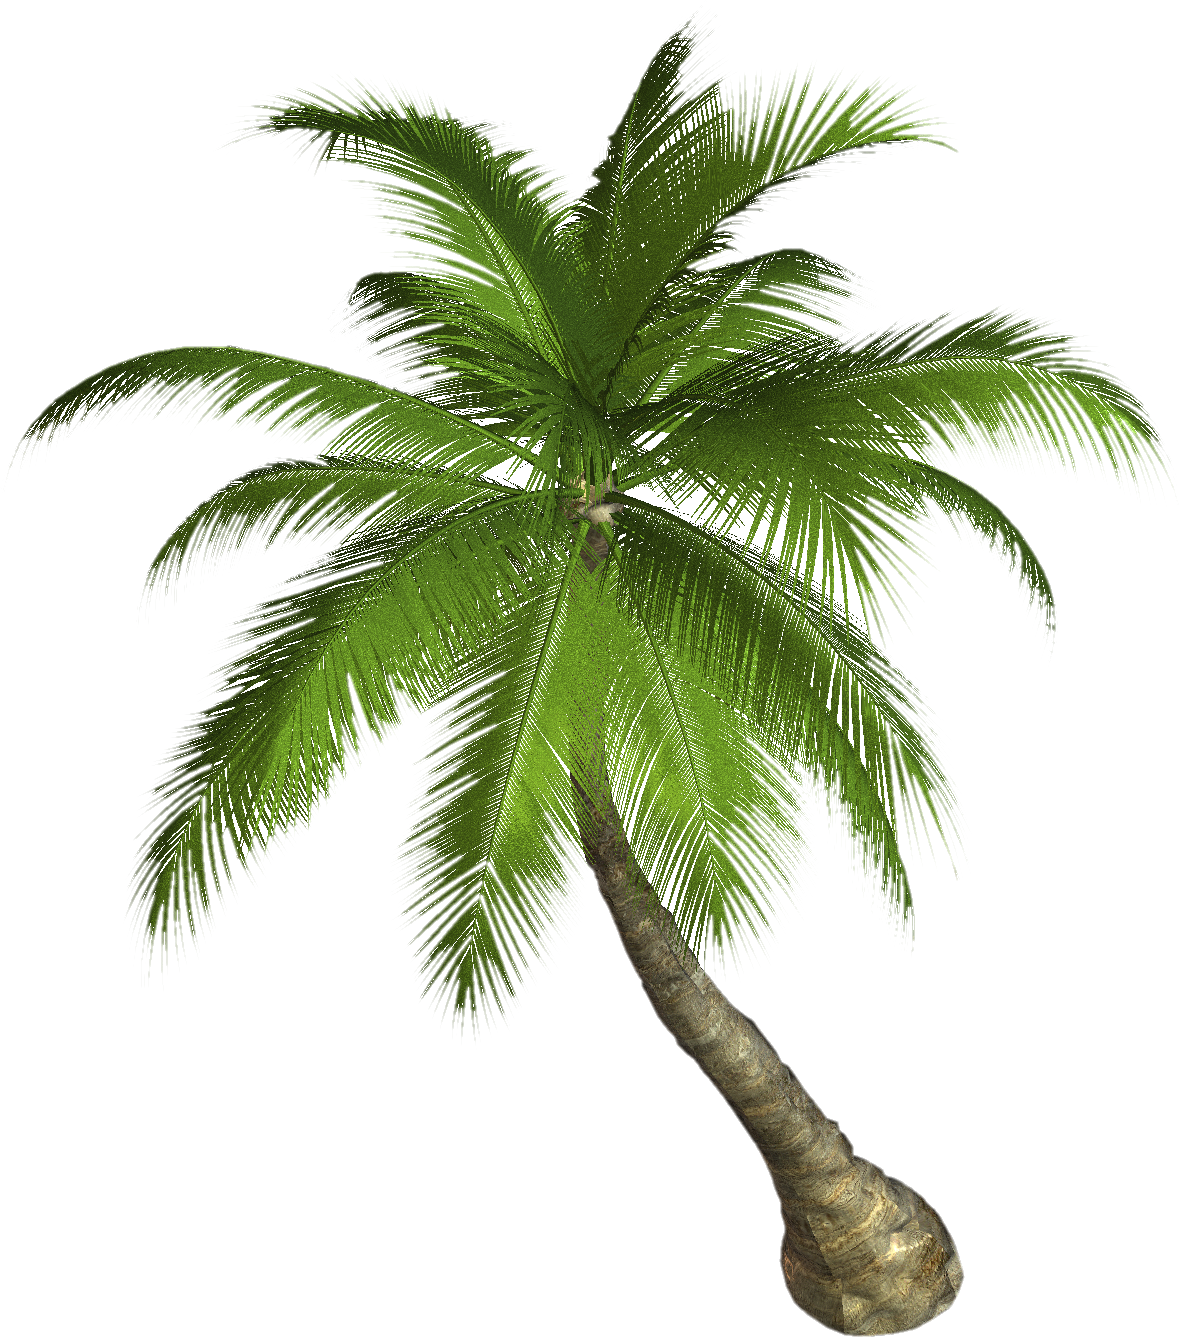 Download - Date Palm PNG